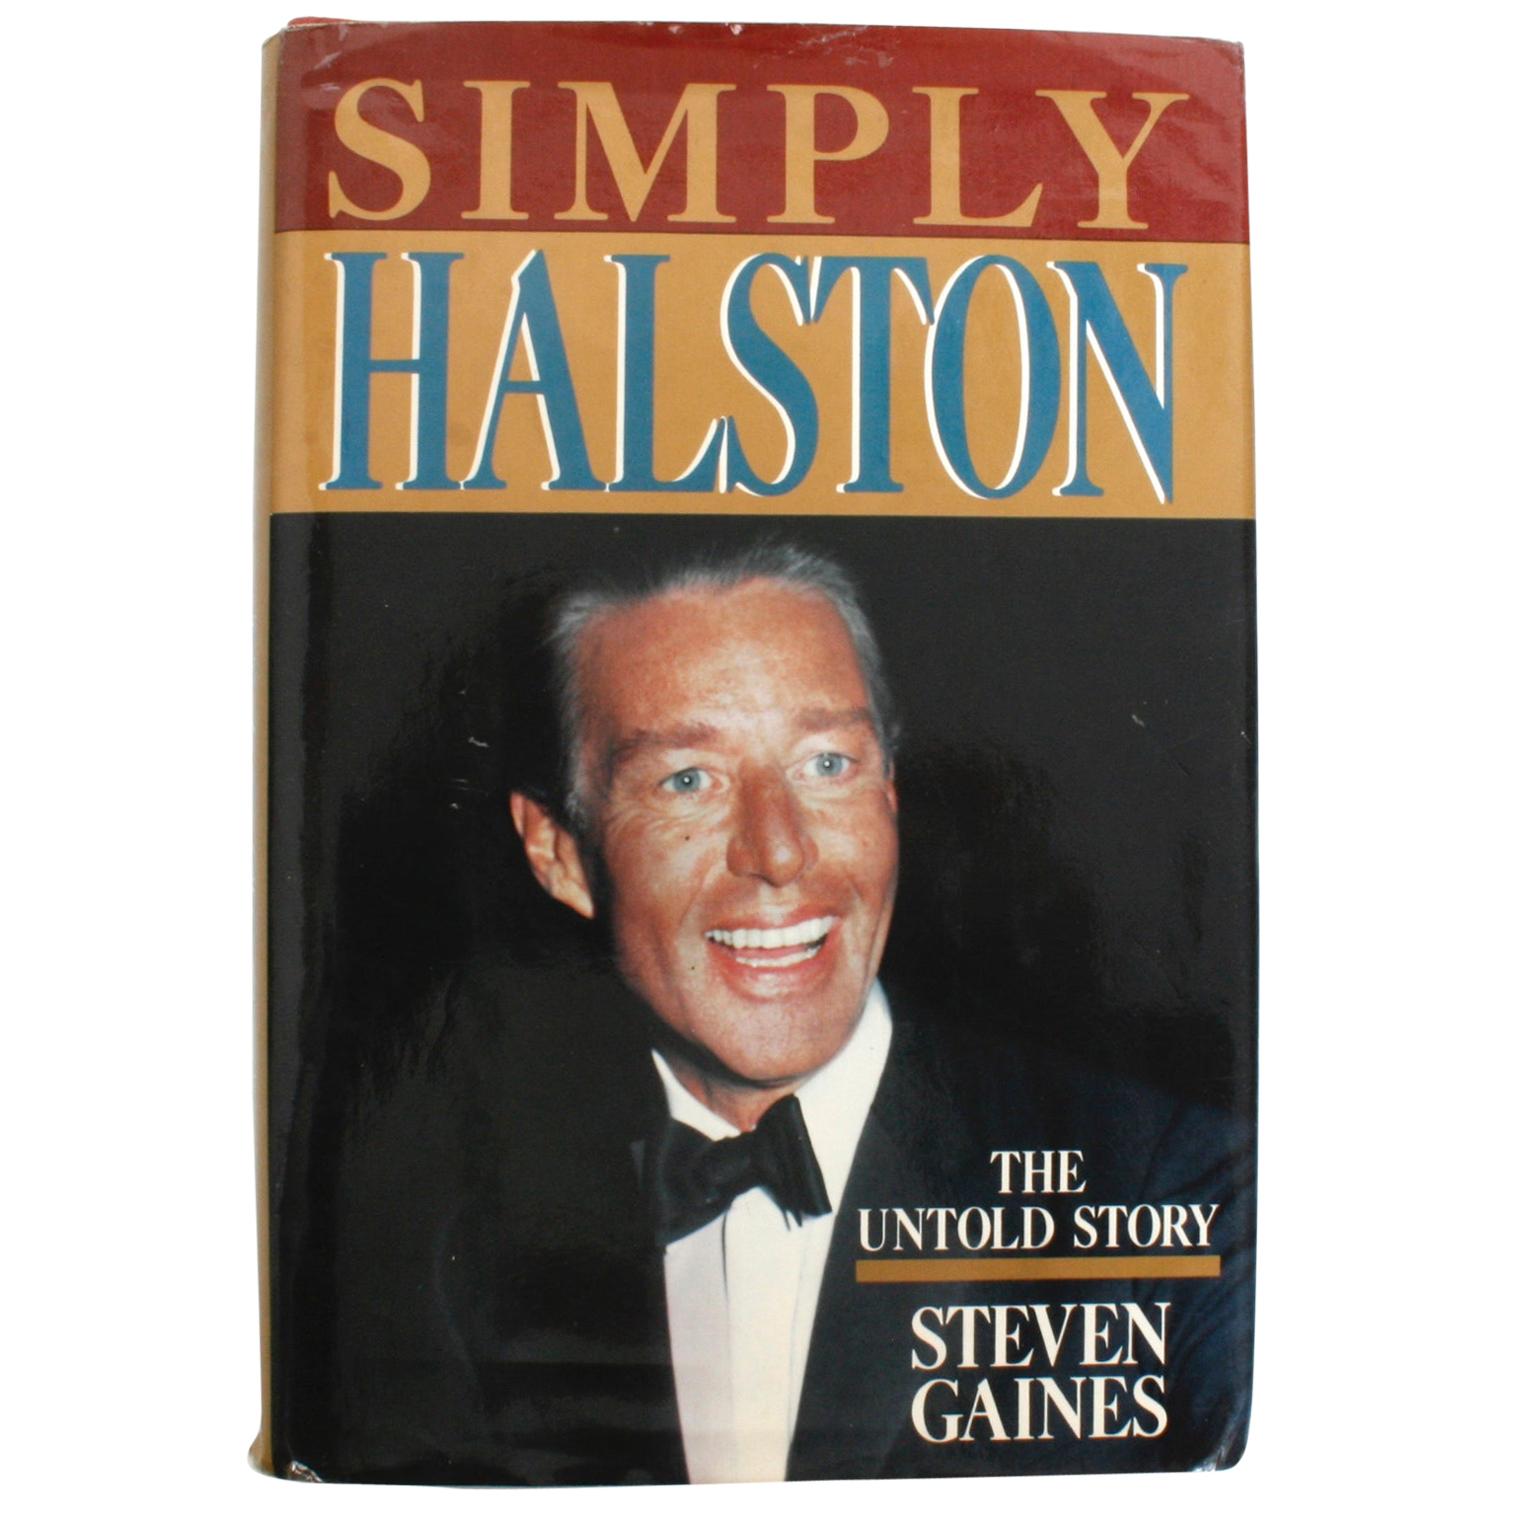 Simply Halston, The Untold Story by Steven Gaines, Signed First Edition